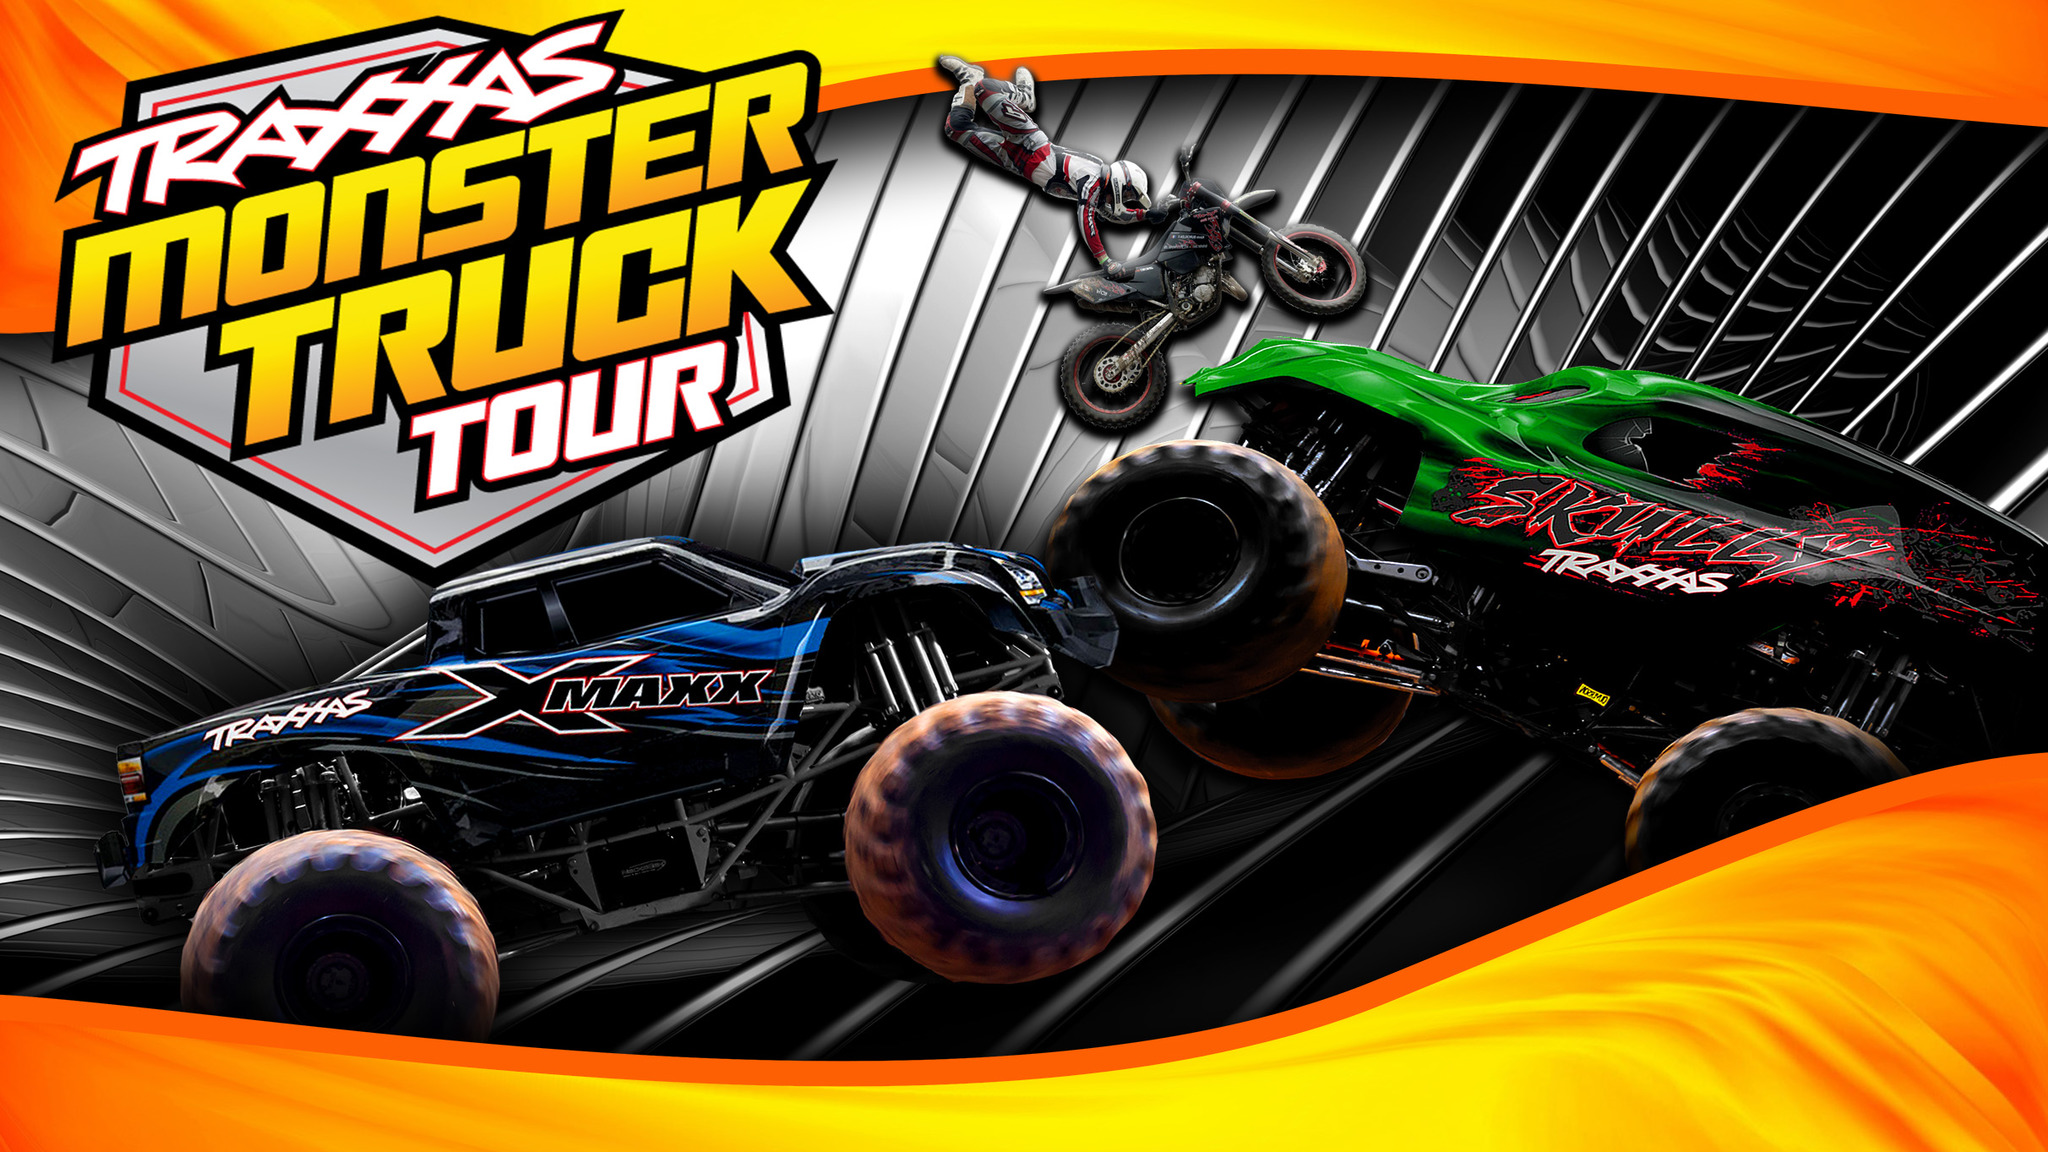 TRAXXAS Monster Truck Tour 730pm First National Bank Arena